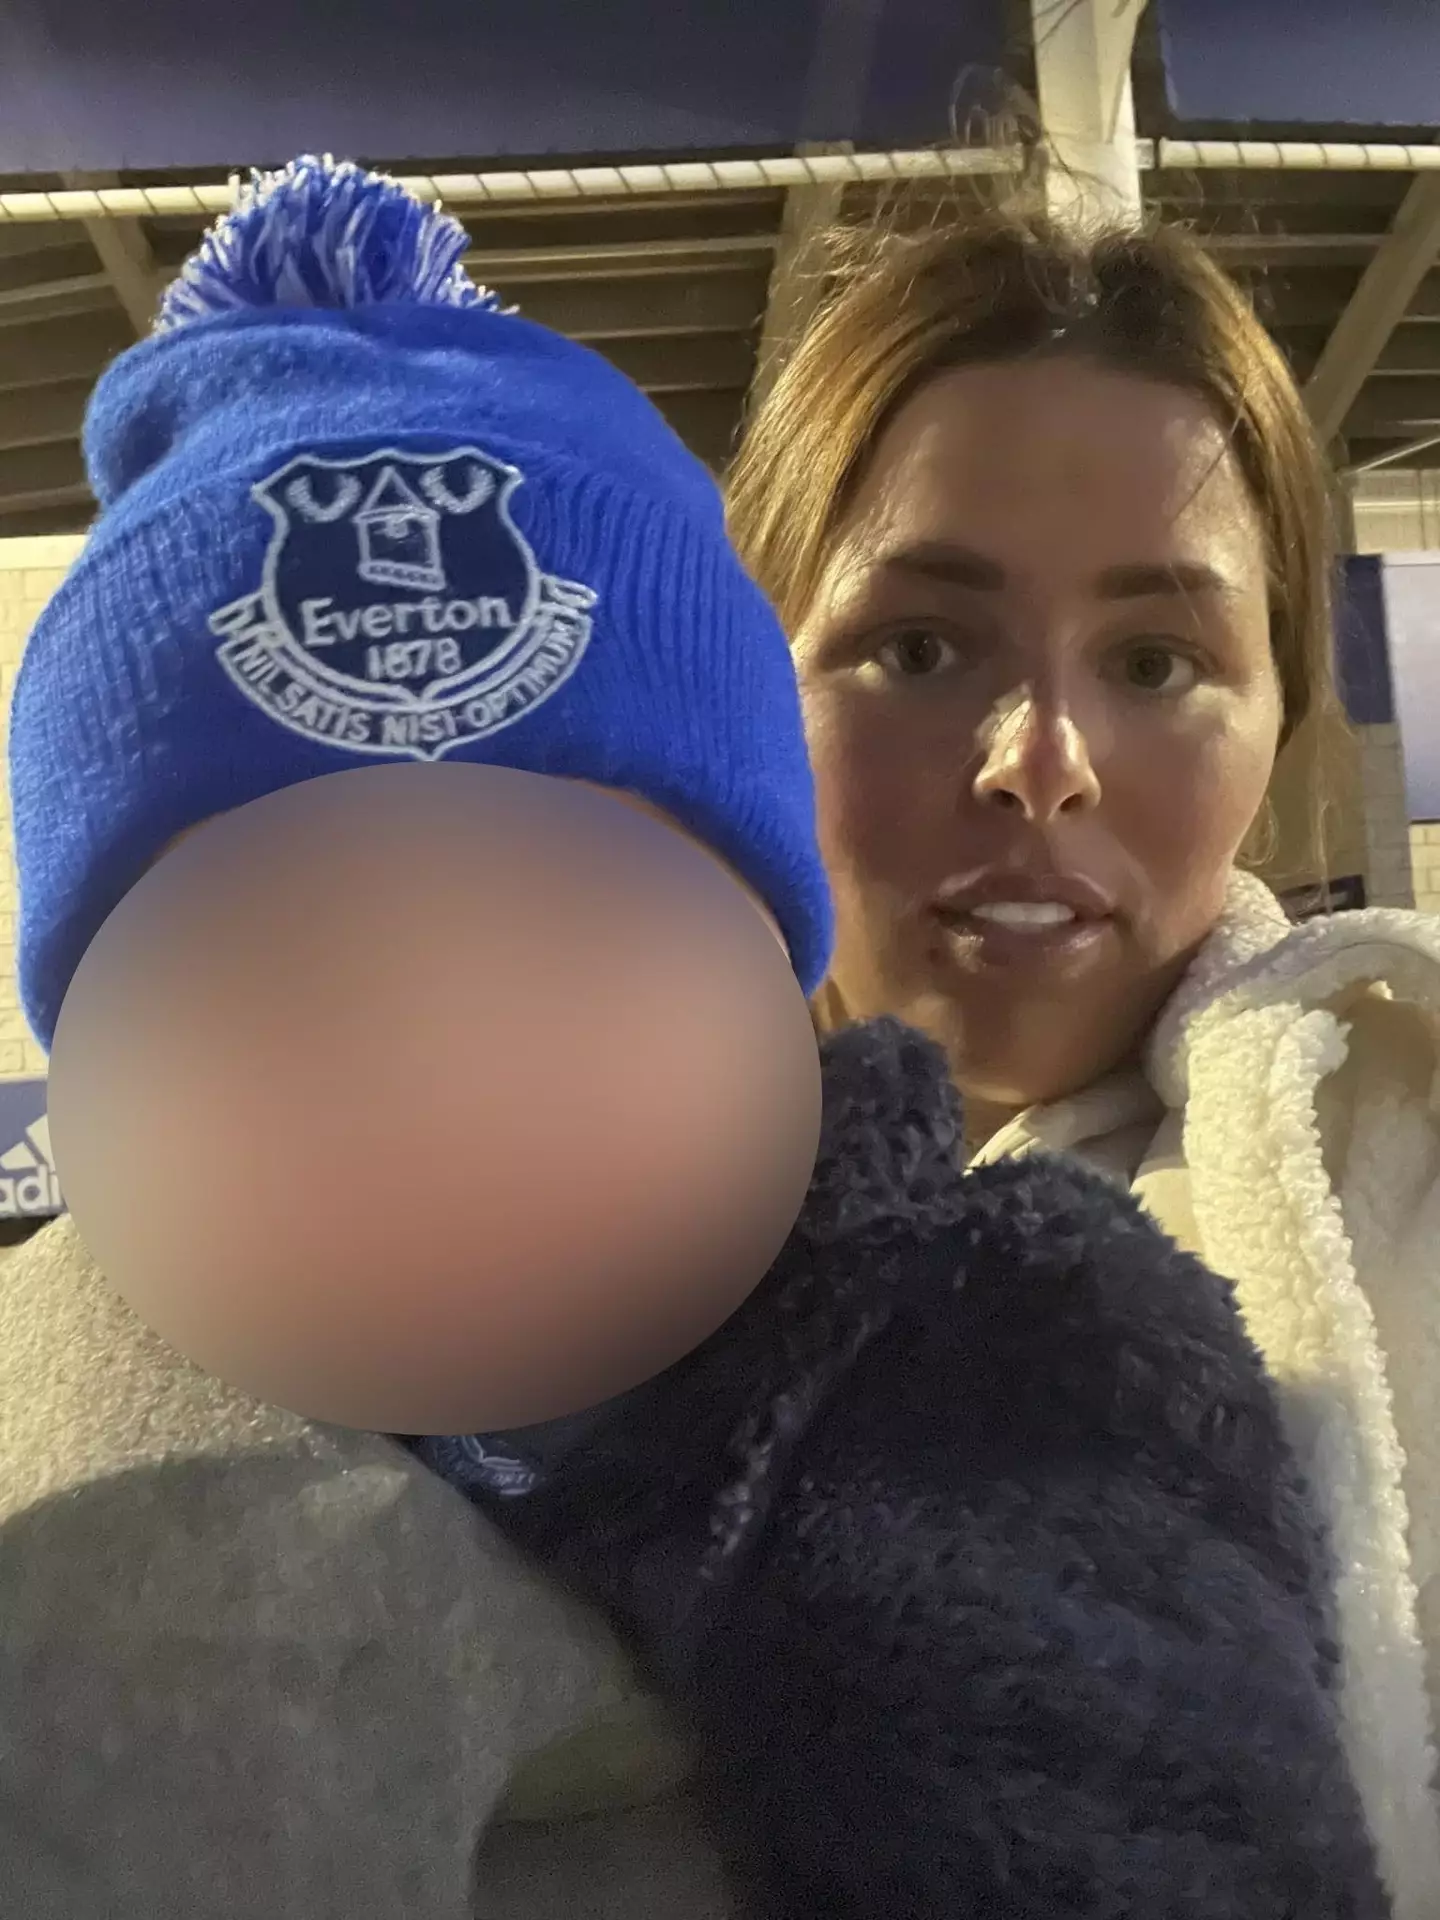 The Everton supporting mum said she and her six-month-old baby were removed from the King Power Stadium.